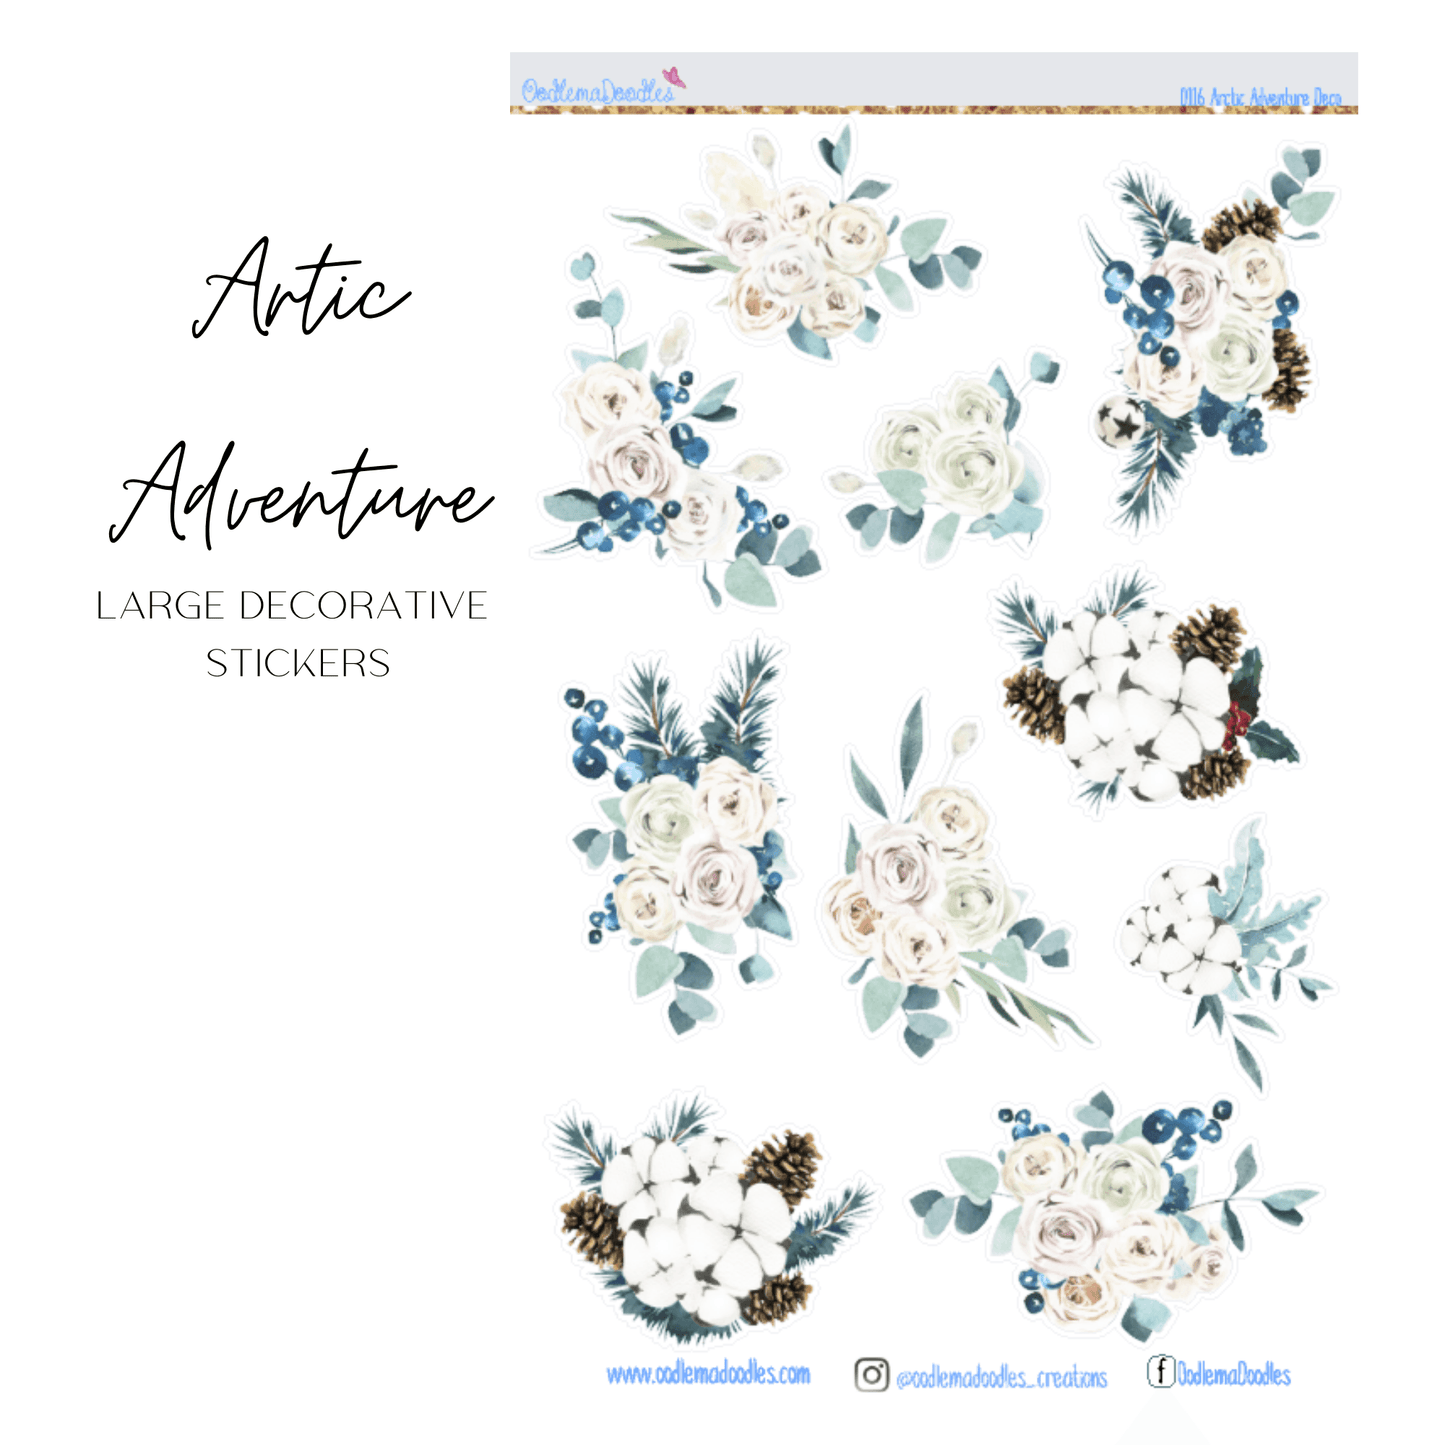 Arctic Adventure Large Decorative Planner Stickers - oodlemadoodles